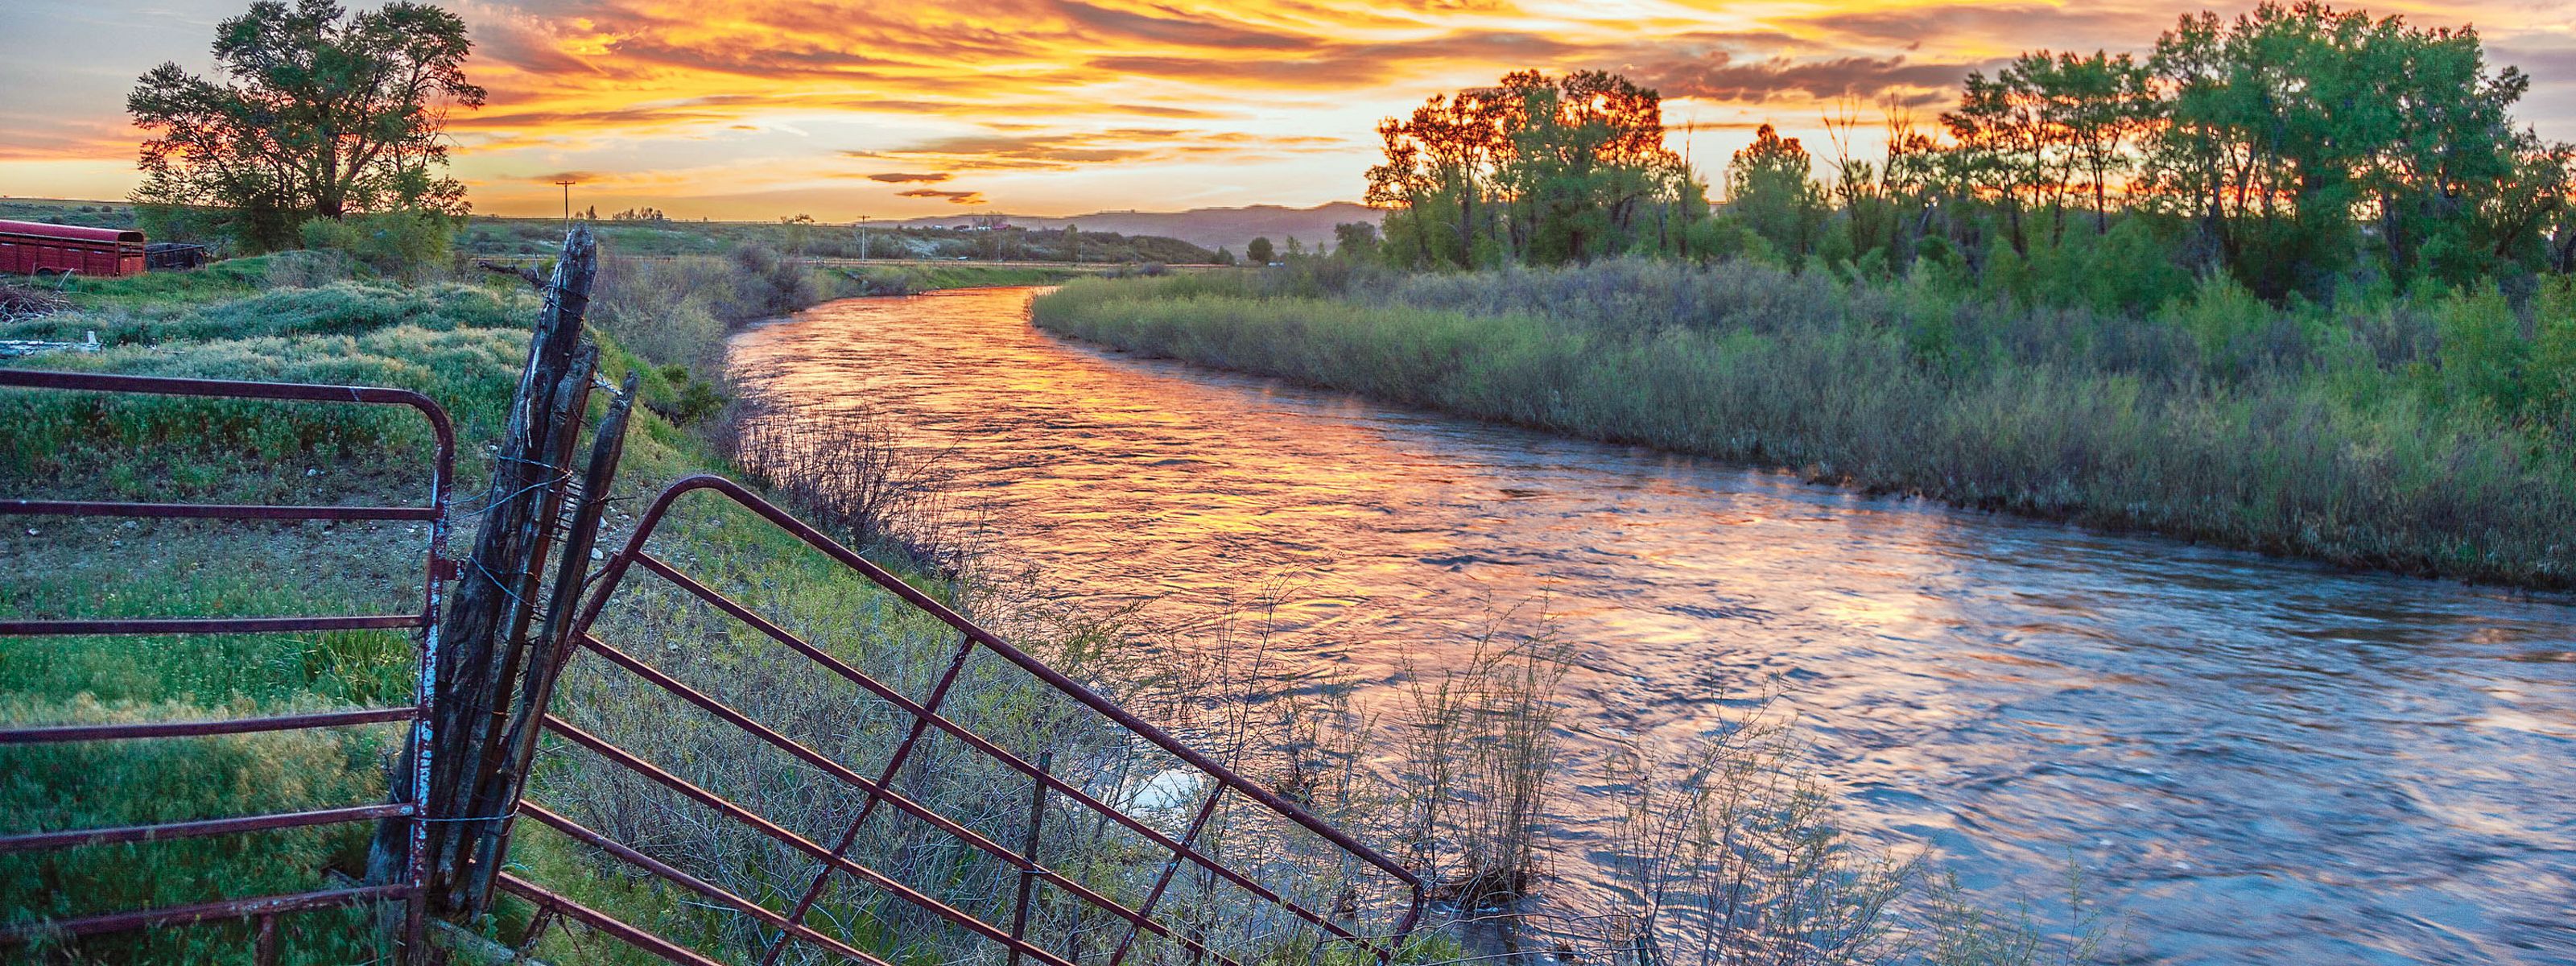 A river flowing through marsh with a bright sunset reflecting on the river.